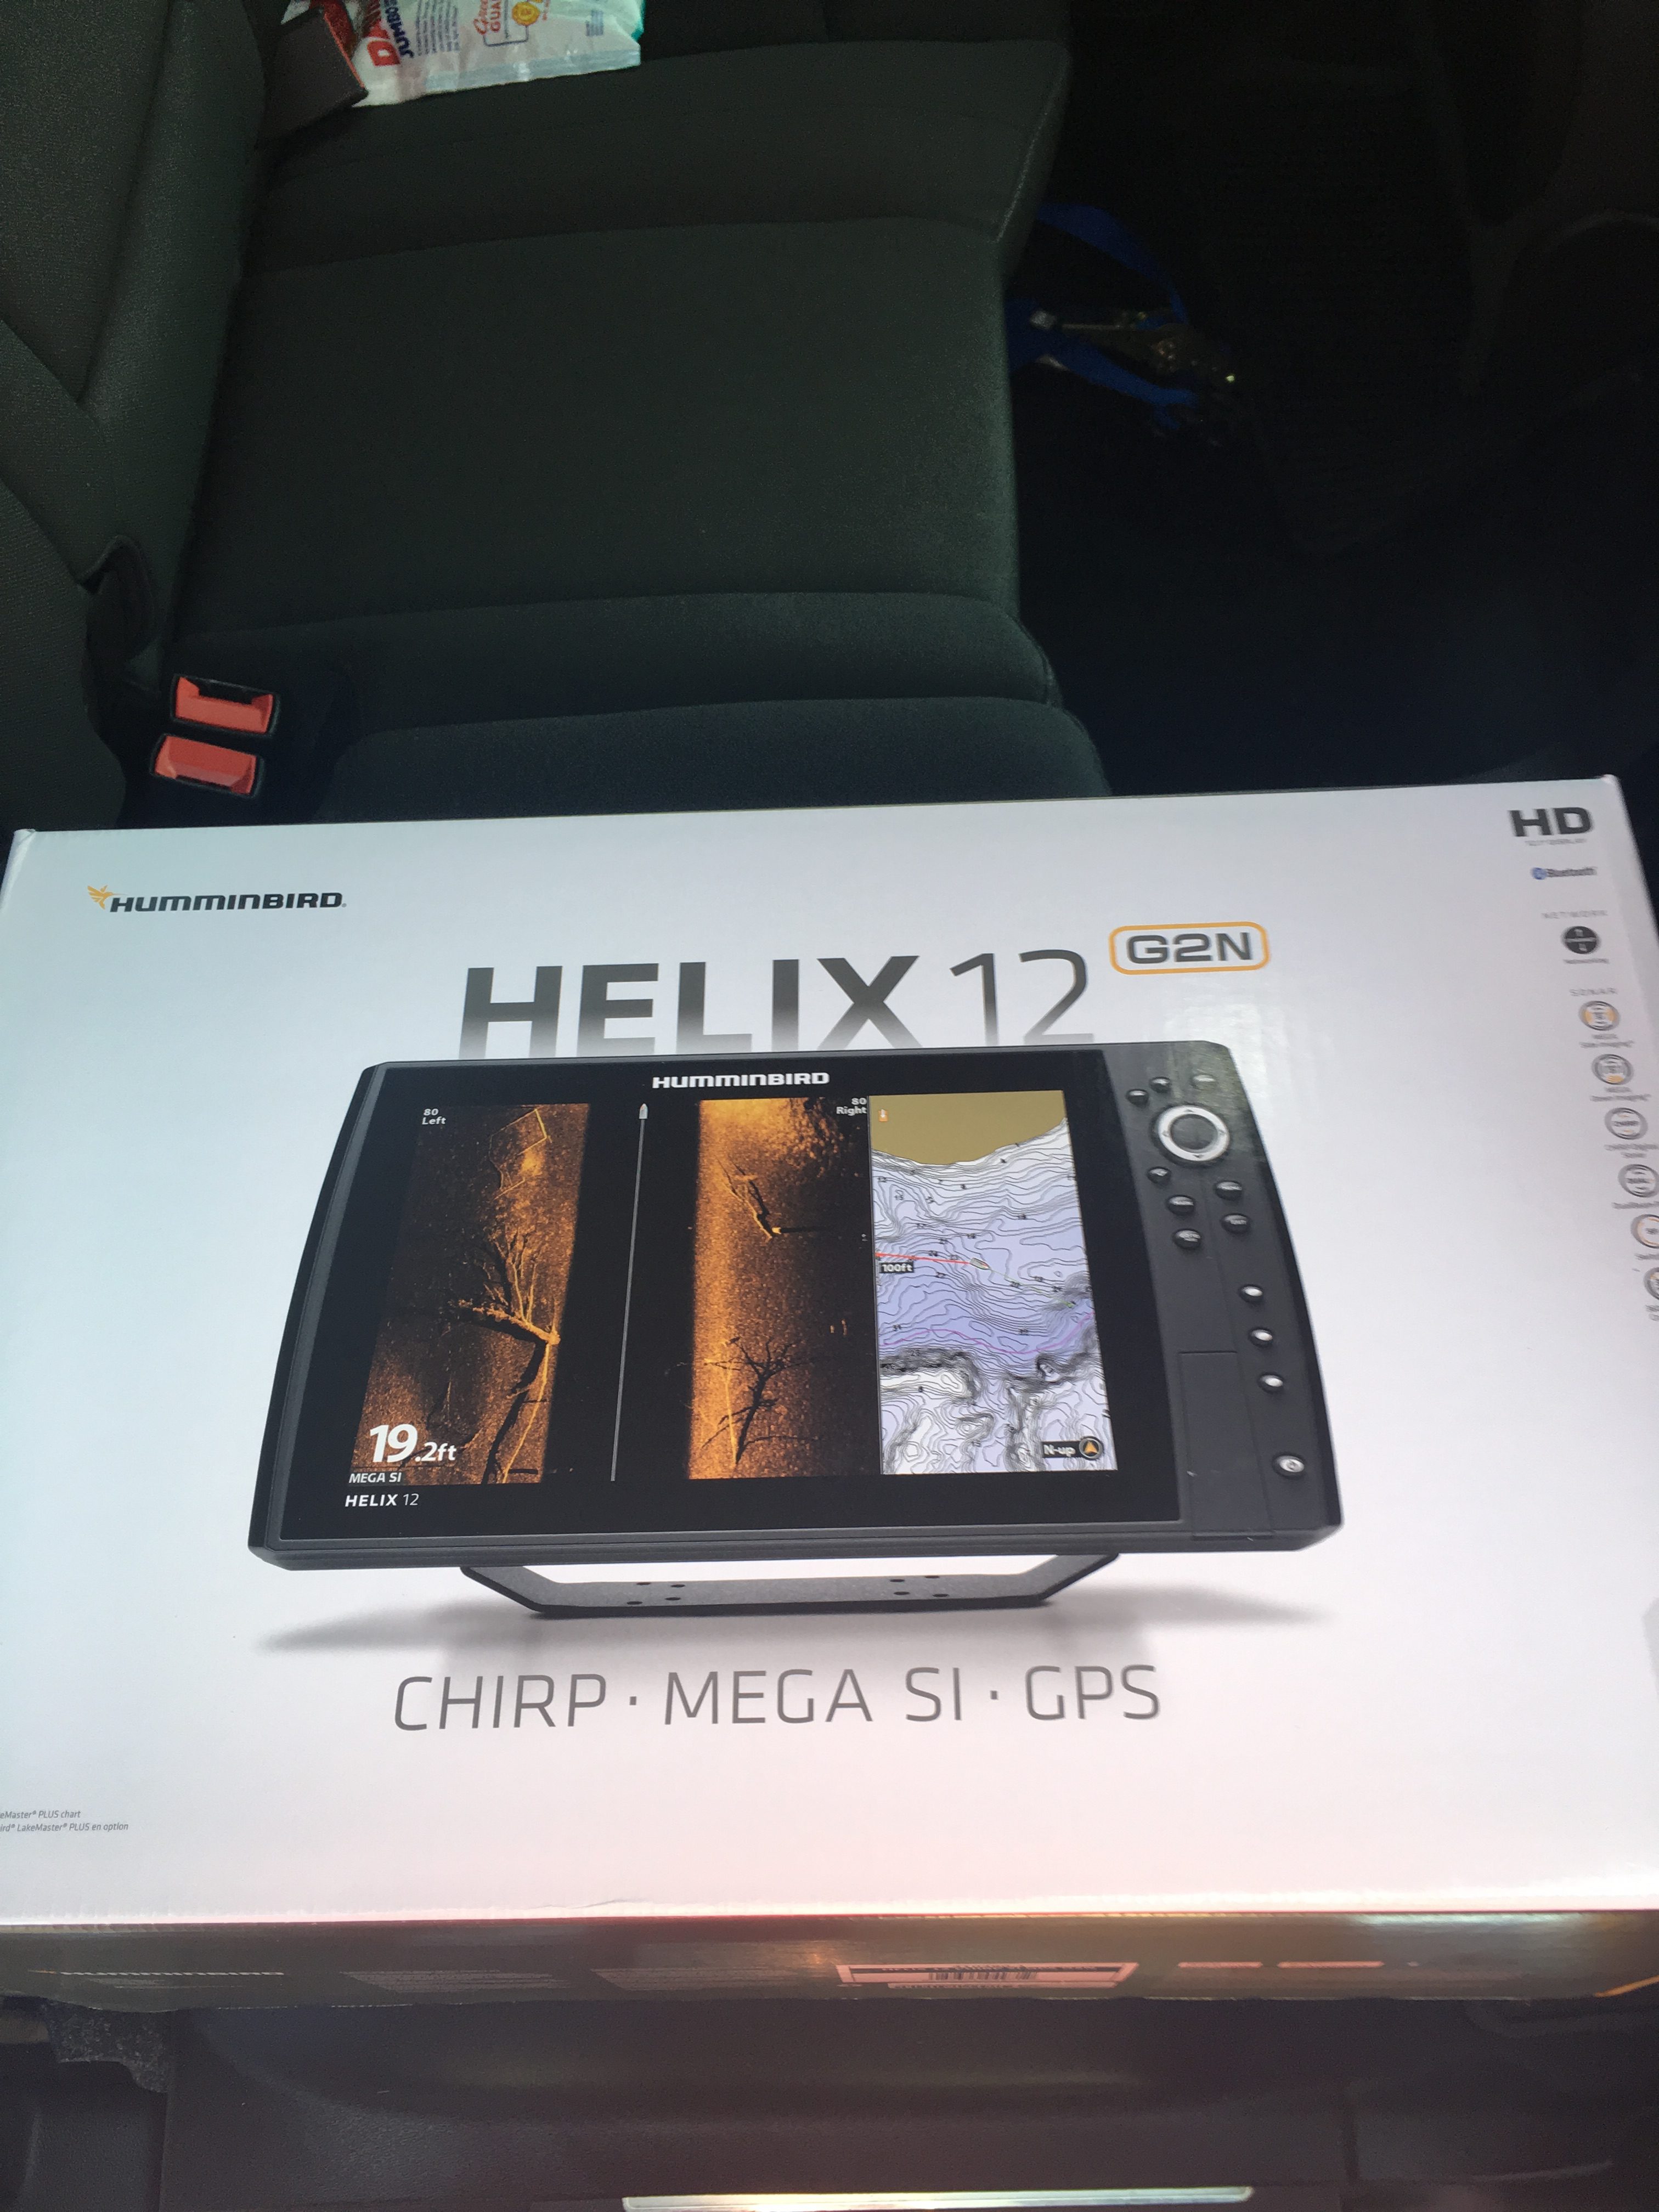 Humminbird Helix 12 Mega Chirp SI New in unopened box - Classified Ads -  Classified Ads